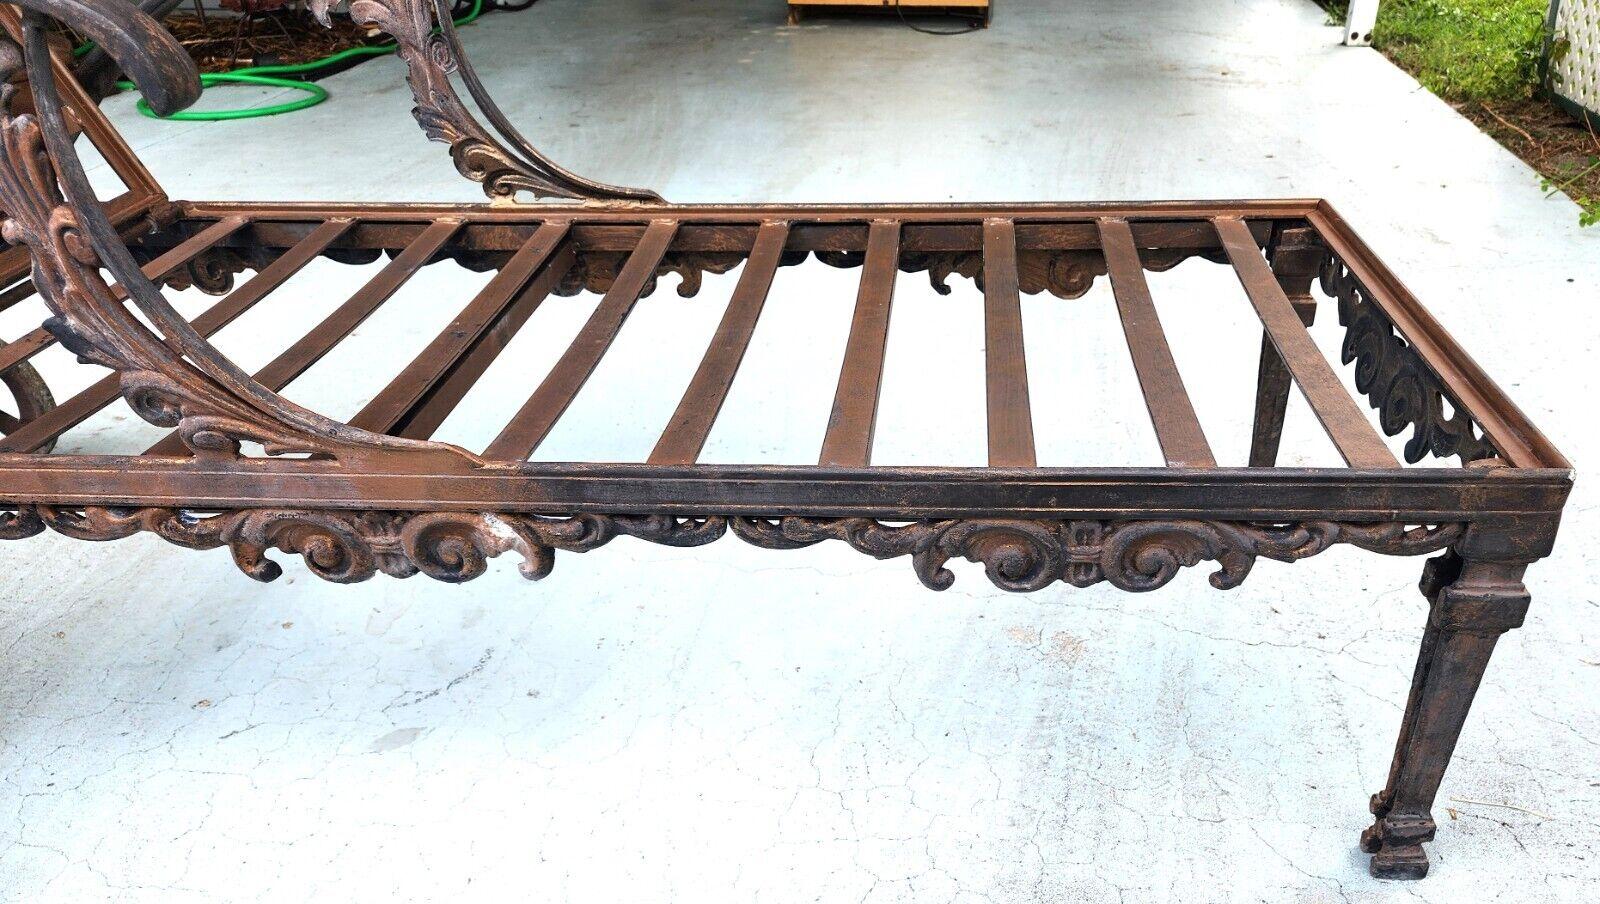 Vintage Chaise Lounges Outdoor Ornate Rustproof In Good Condition For Sale In Lake Worth, FL